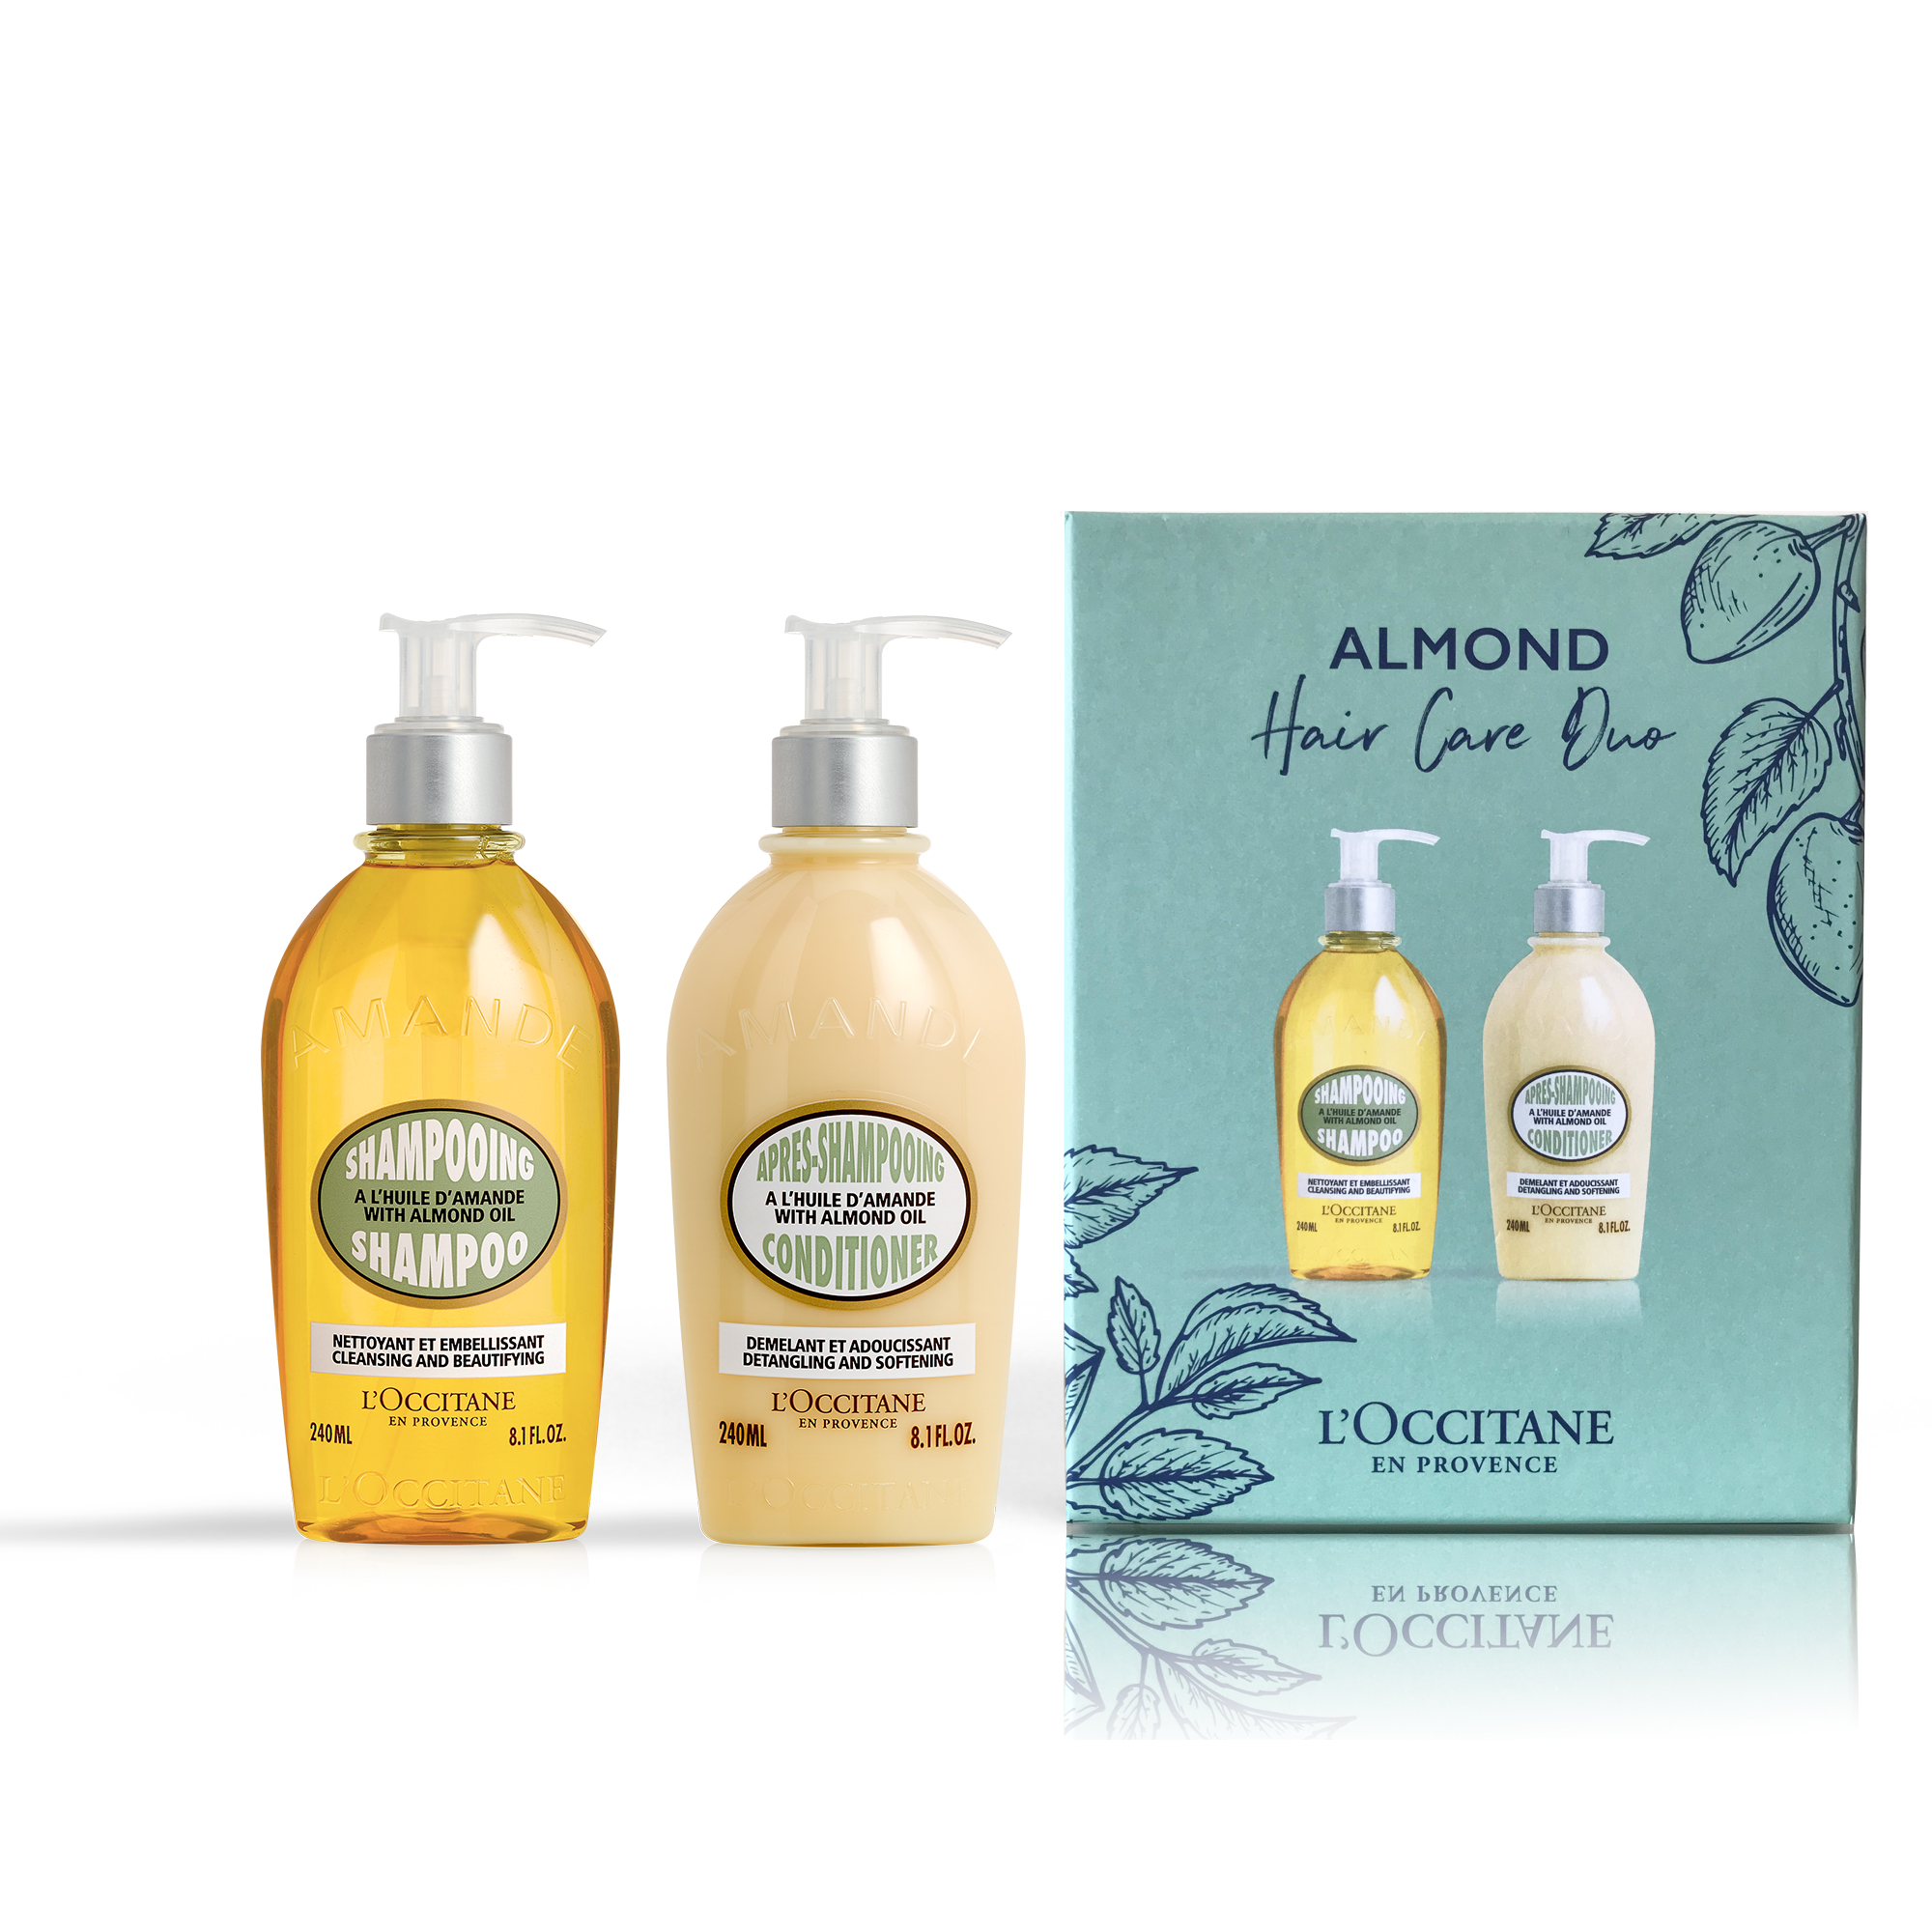 95LW0323 Almond Haircare Duo